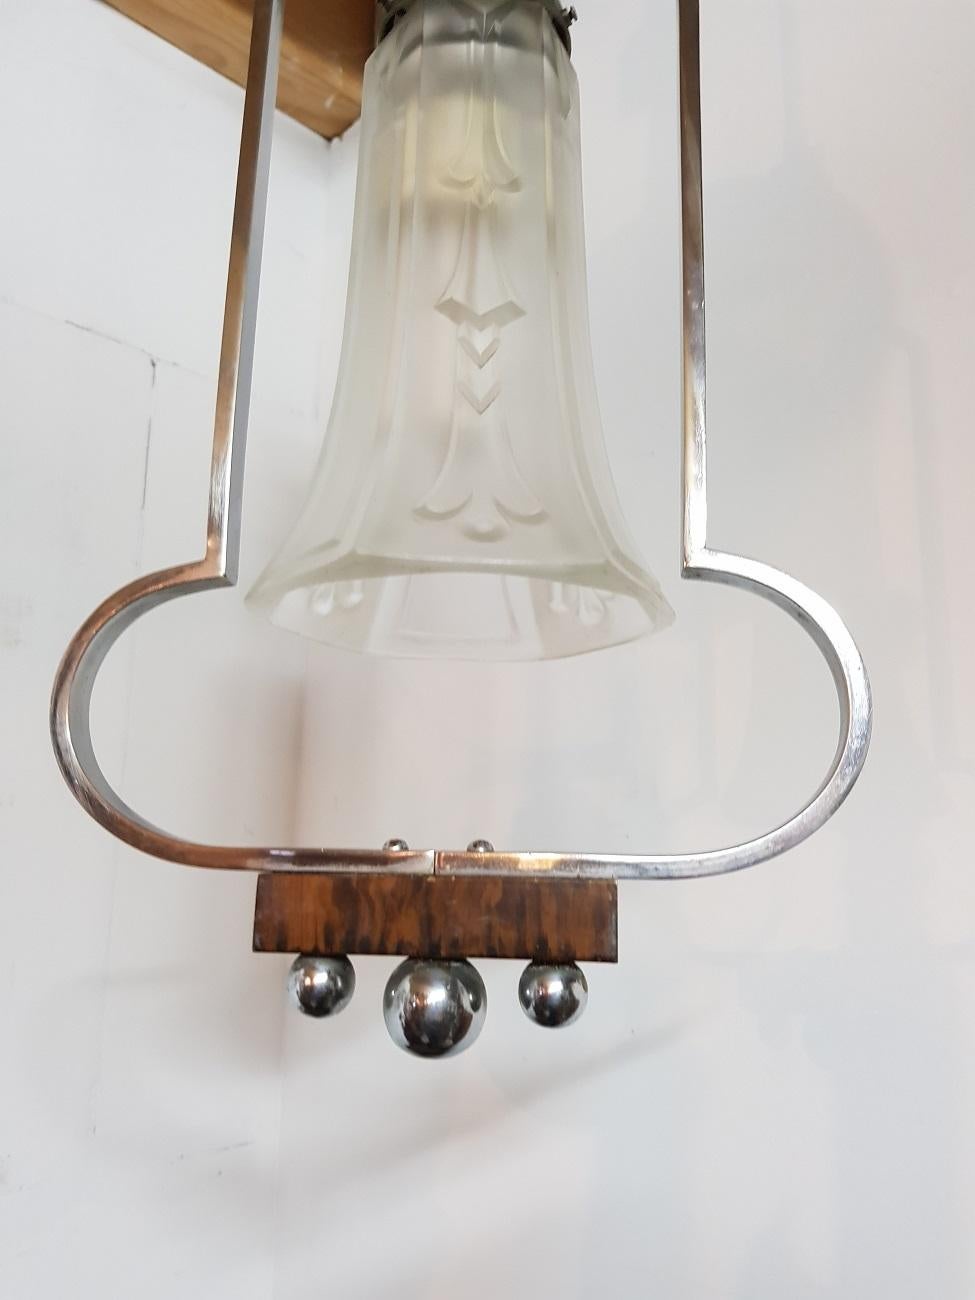 Art Deco partly chrome and wooden hall pendant with press glass shade, made in the 1930s and the wire and fitting is renewed.

The measurements are,
Depth 13.5 cm/ 5.3 inch.
Width 24.5 cm/ 9.6 inch.
Height 74.5 cm/ 29.3 inch.